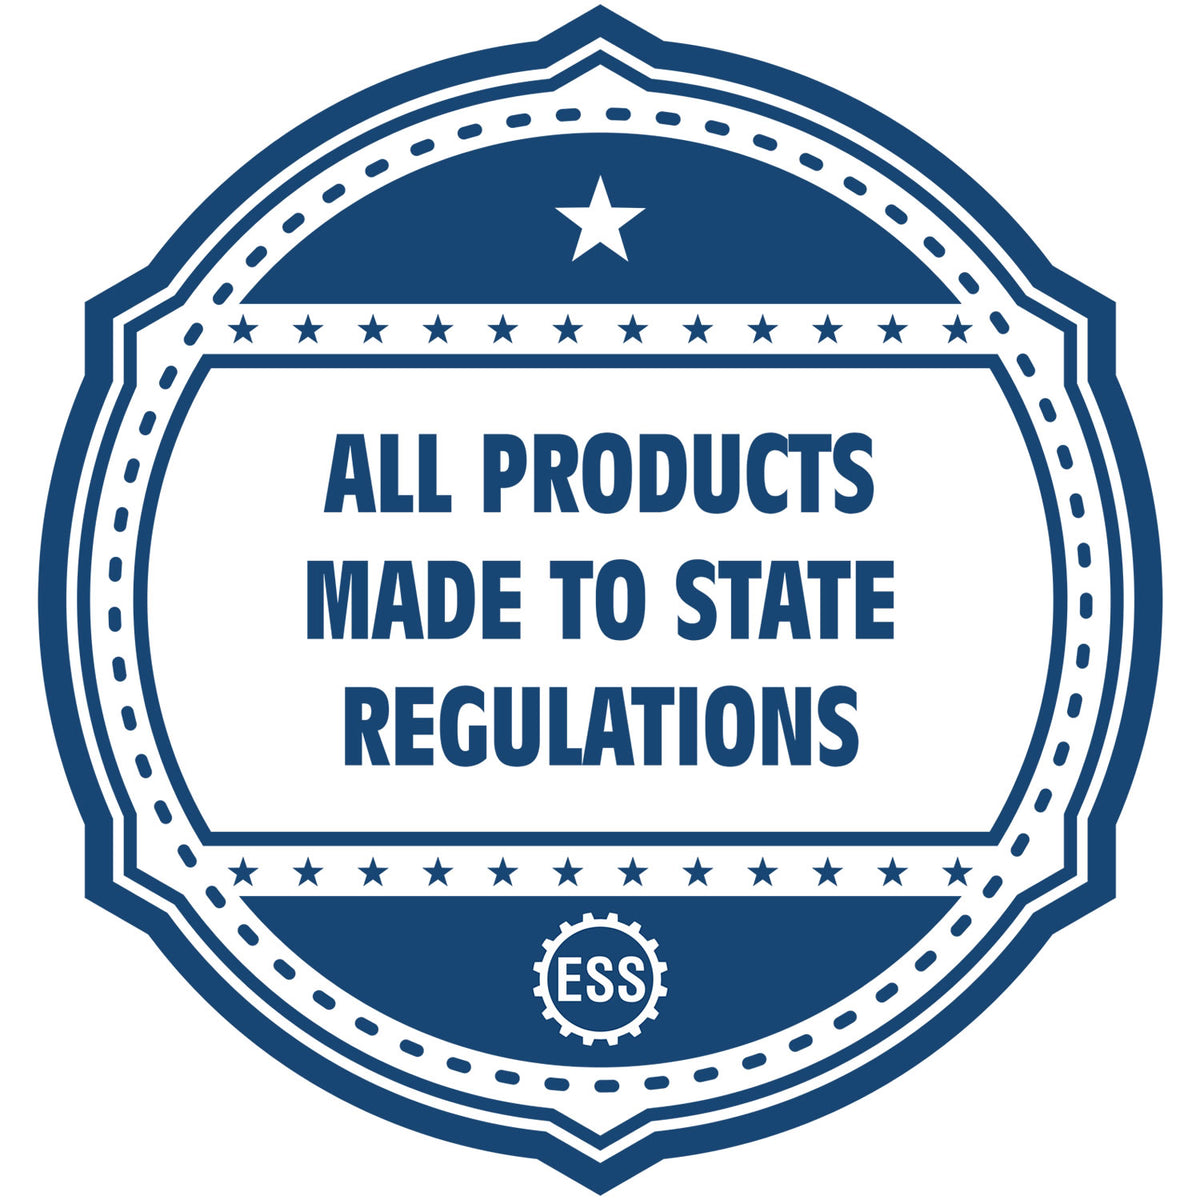 An icon or badge element for the Handheld Alaska Architect Seal Embosser showing that this product is made in compliance with state regulations.